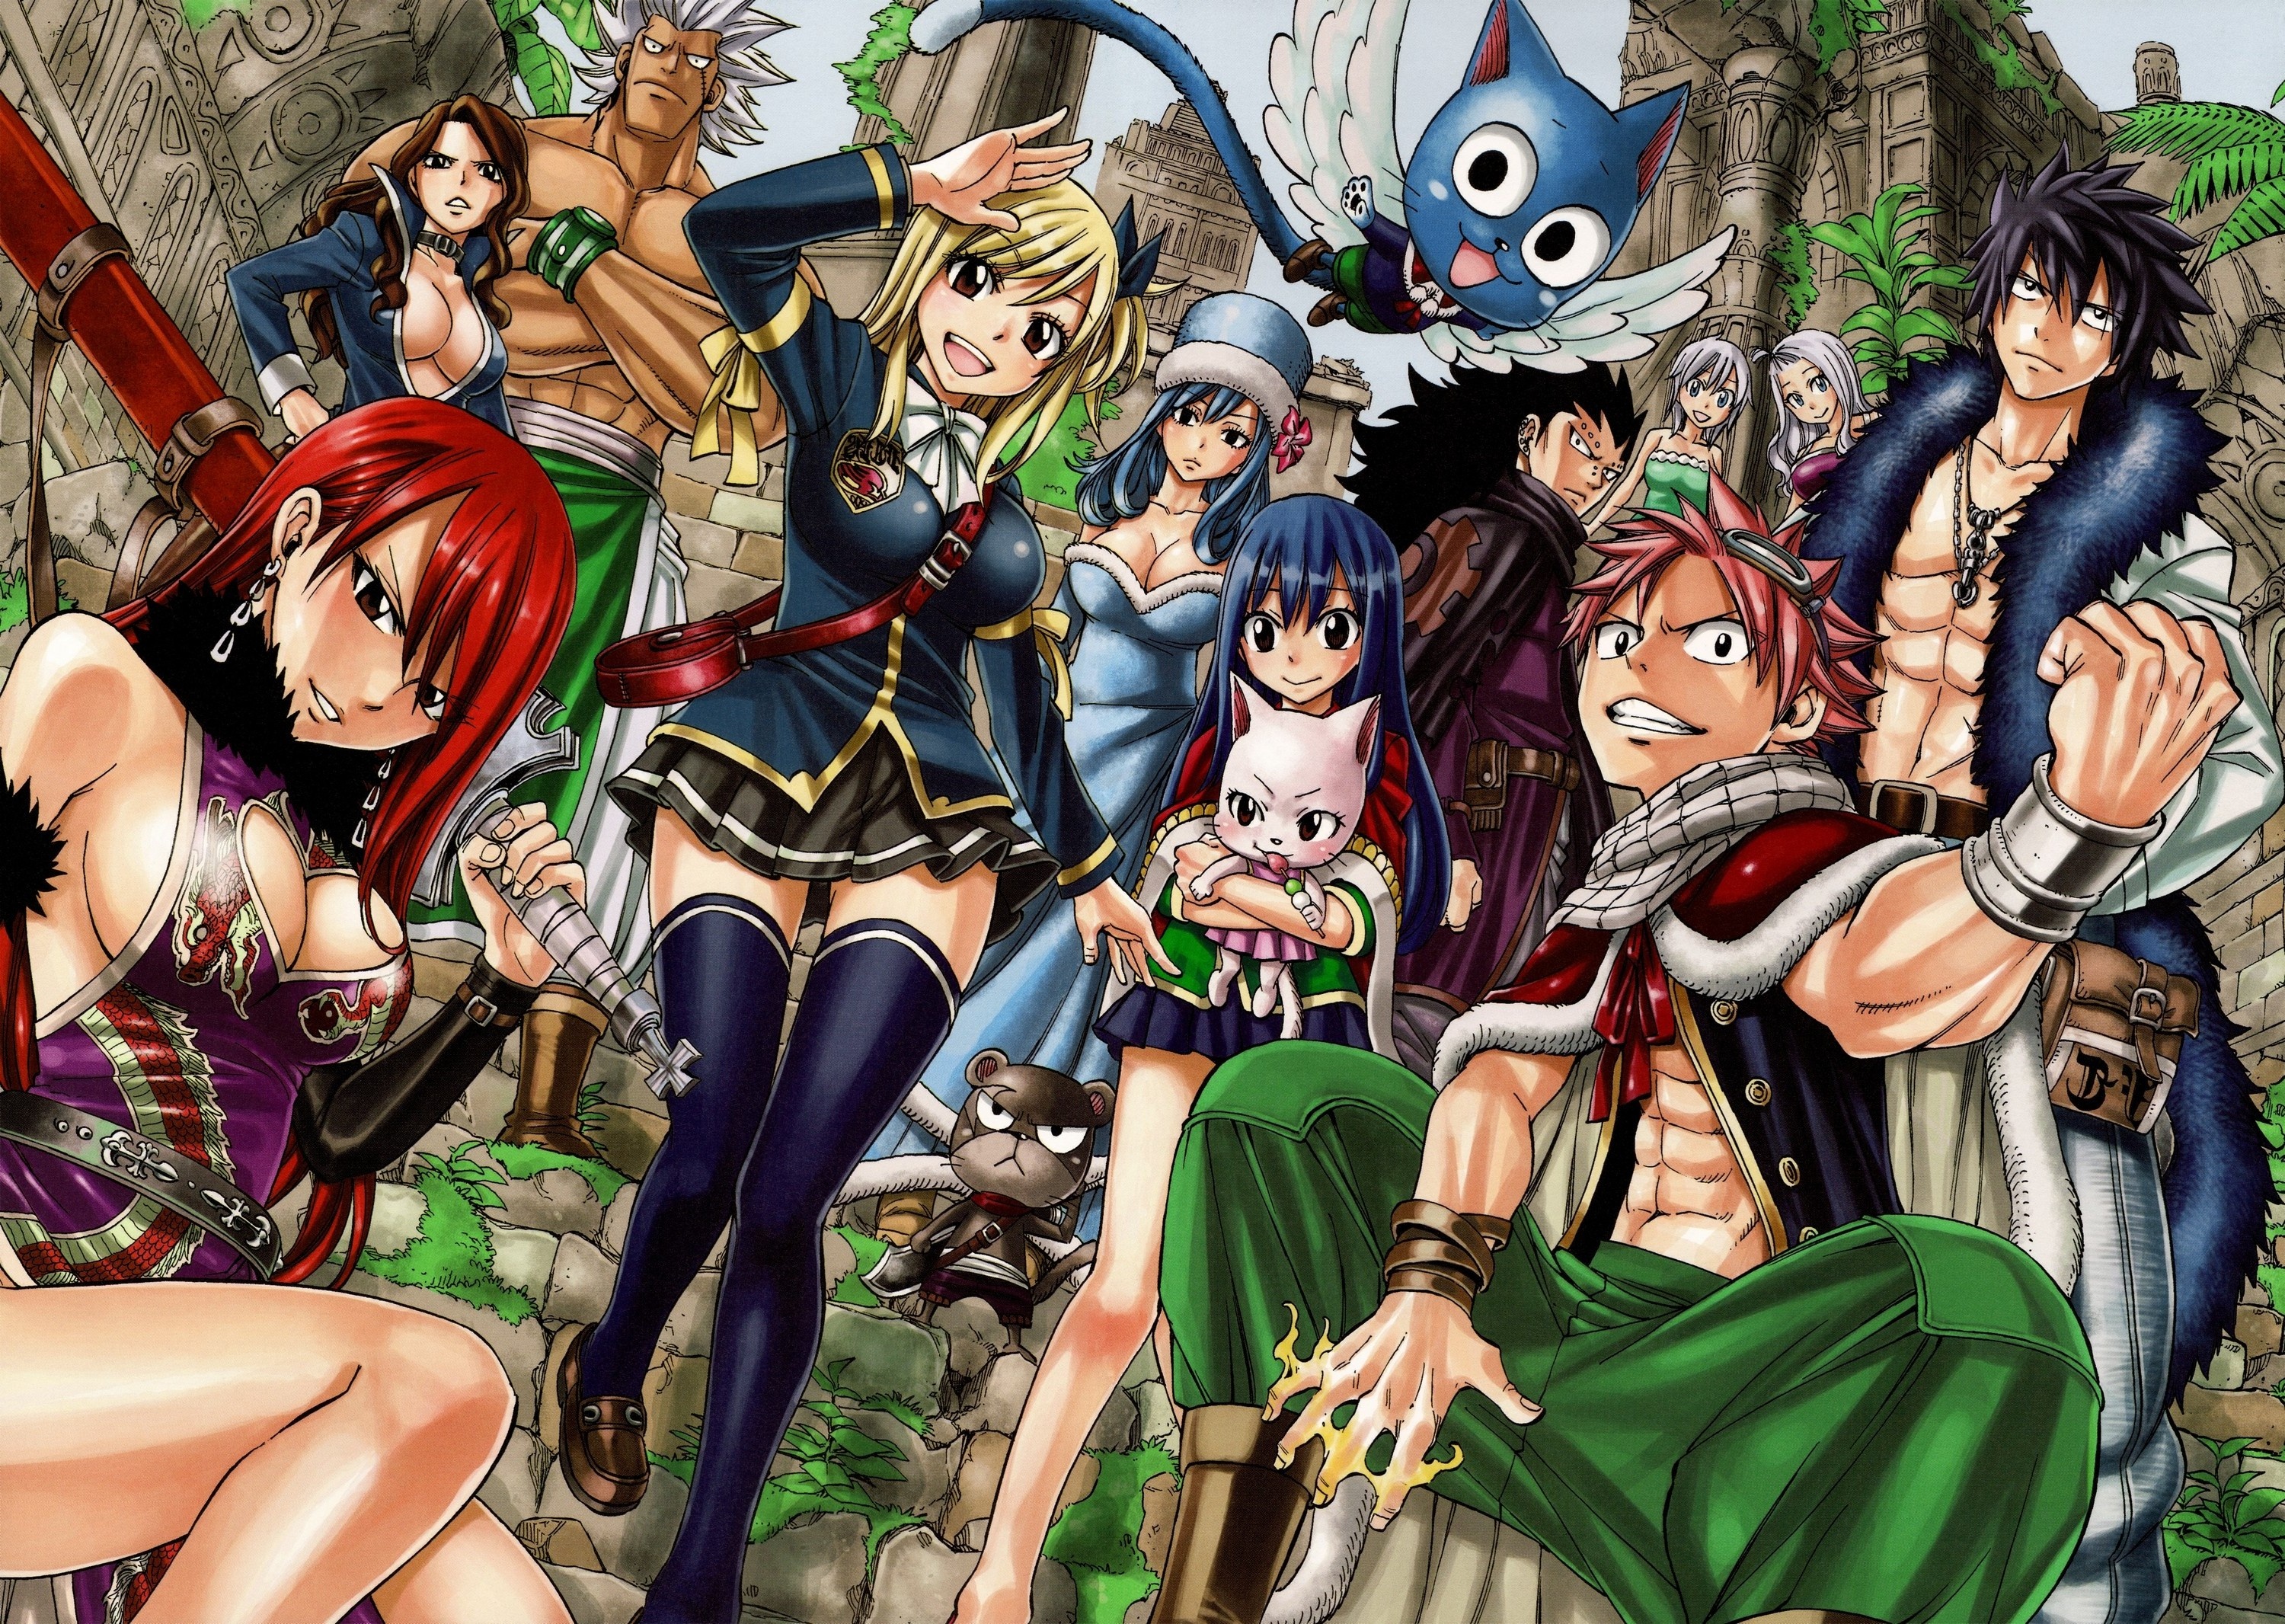 Gray Fullbuster: Fairy Tail, Manga characters, Hiro Mashima, An anime series produced by A-1 Pictures. 3000x2140 HD Background.